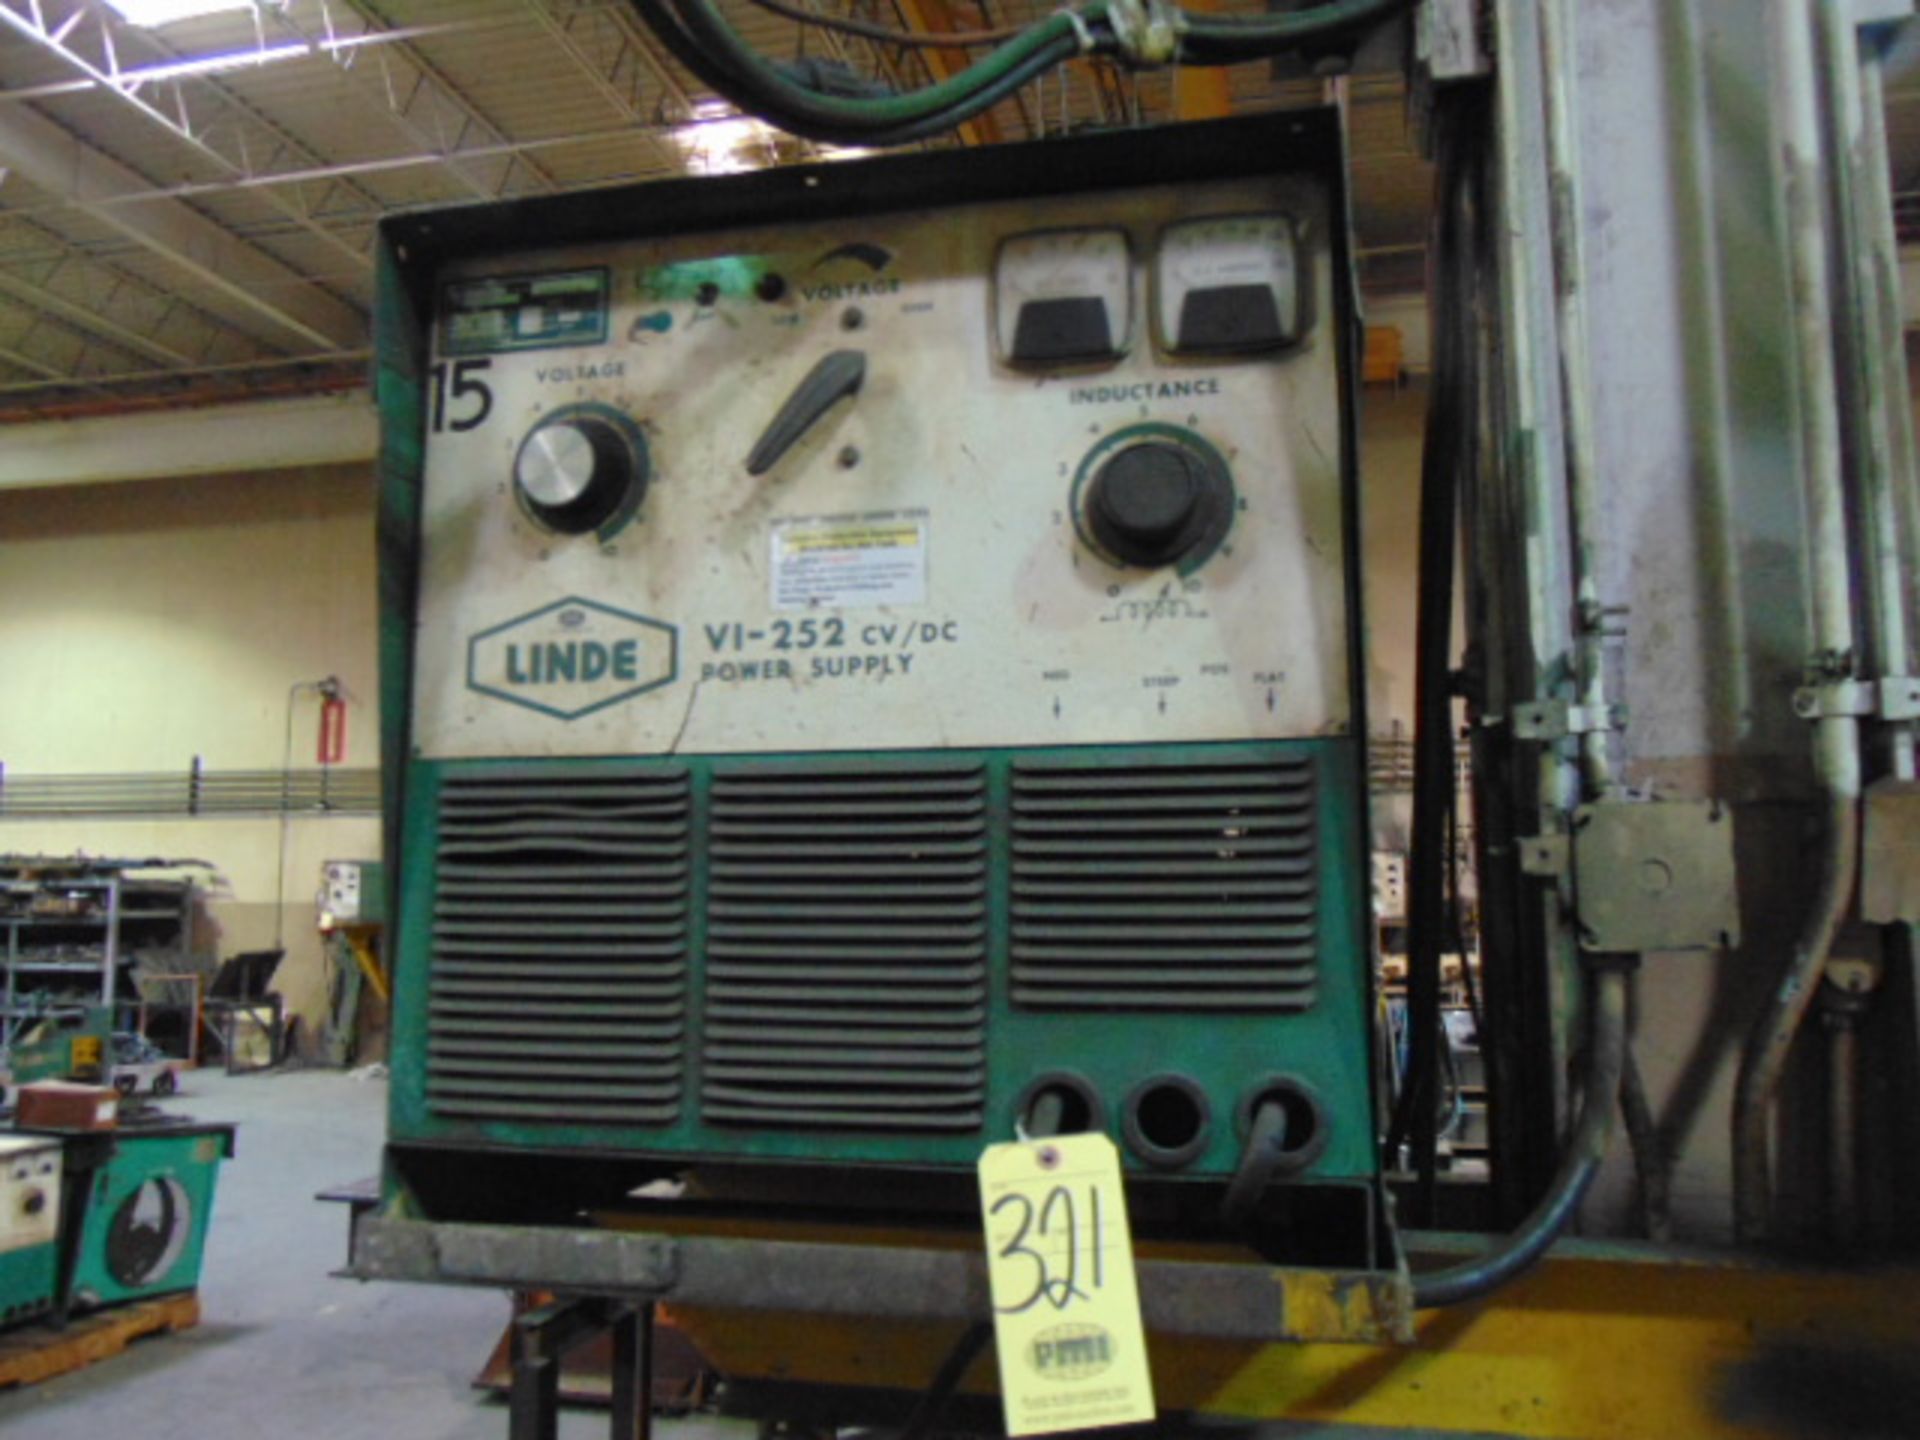 MIG WELDER, LINDE VI-252, 250 amps @ 37 v., 100% duty cycle, Linde wire feed unit